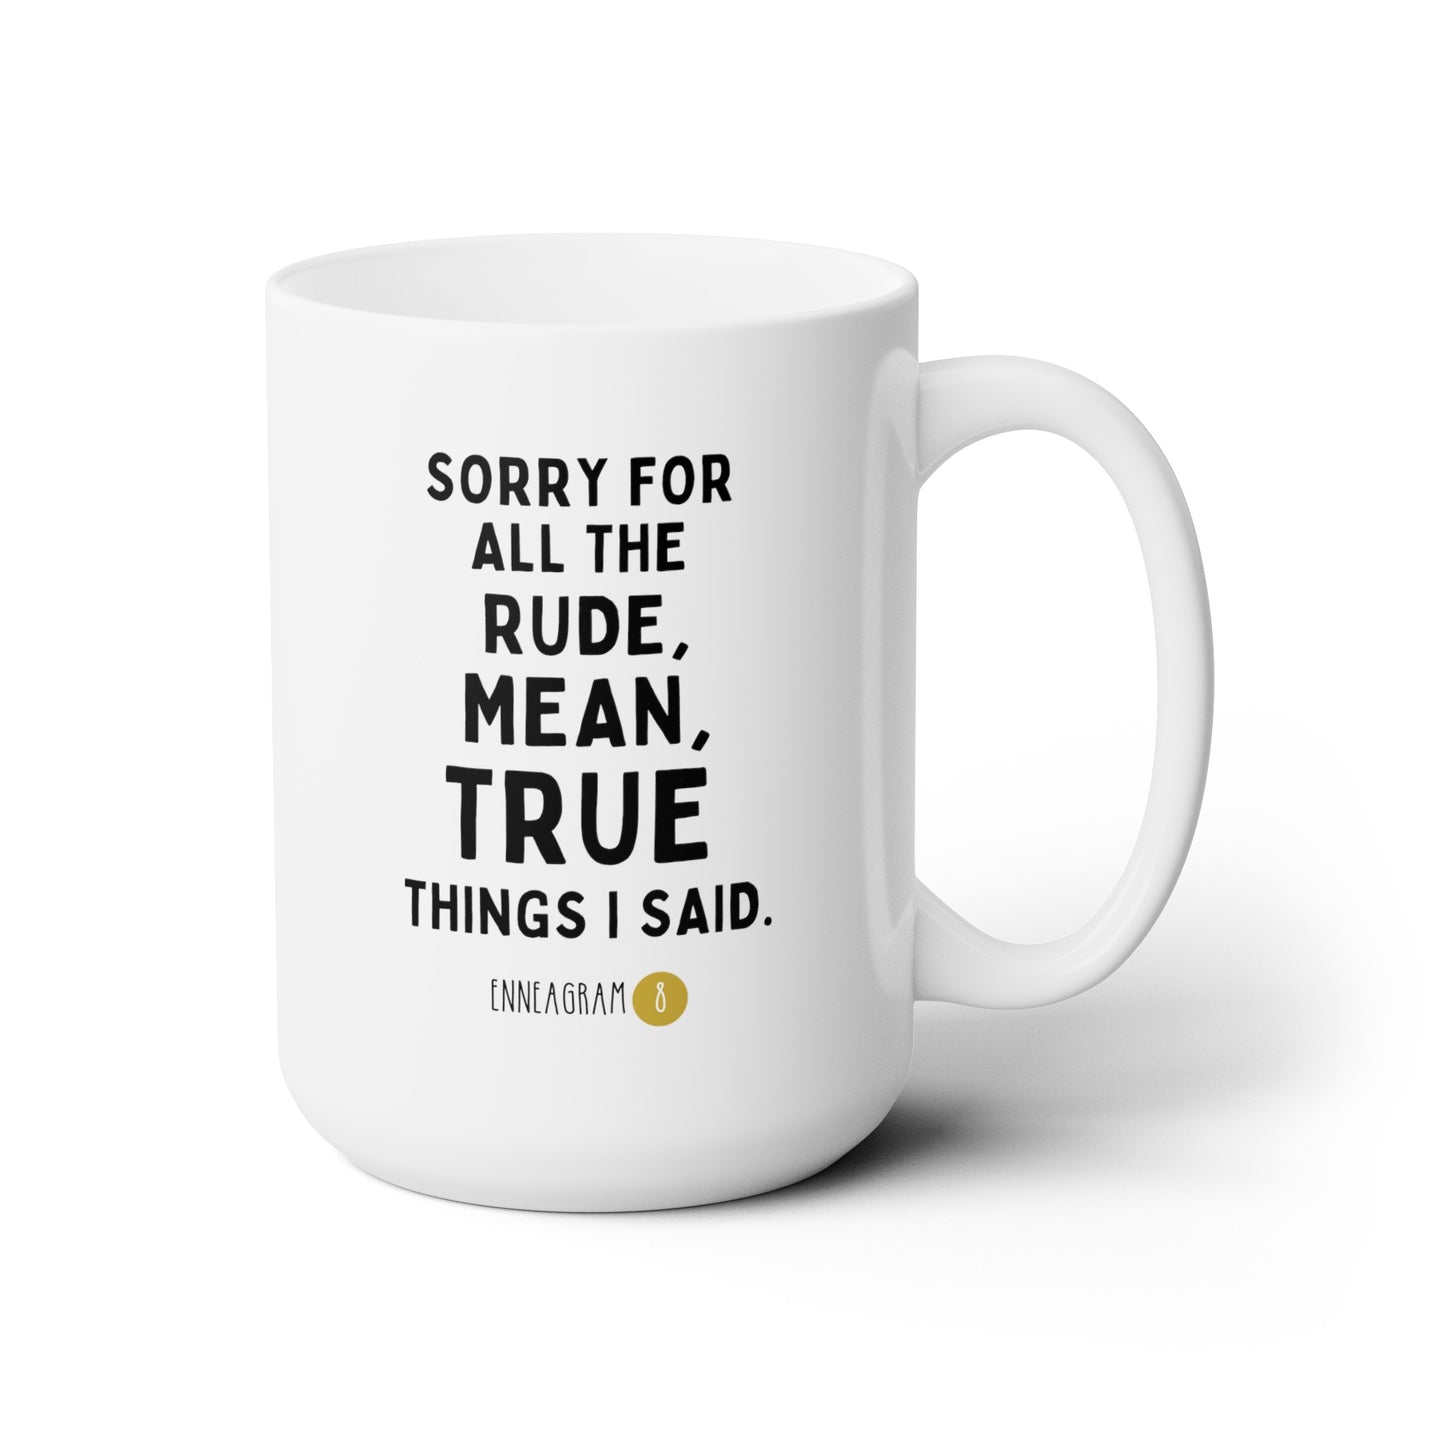 Sorry For All The Rude Mean True Things I Said Enneagram 8 15oz white funny large coffee mug gift for friend mbti personality test waveywares wavey wares wavywares wavy wares